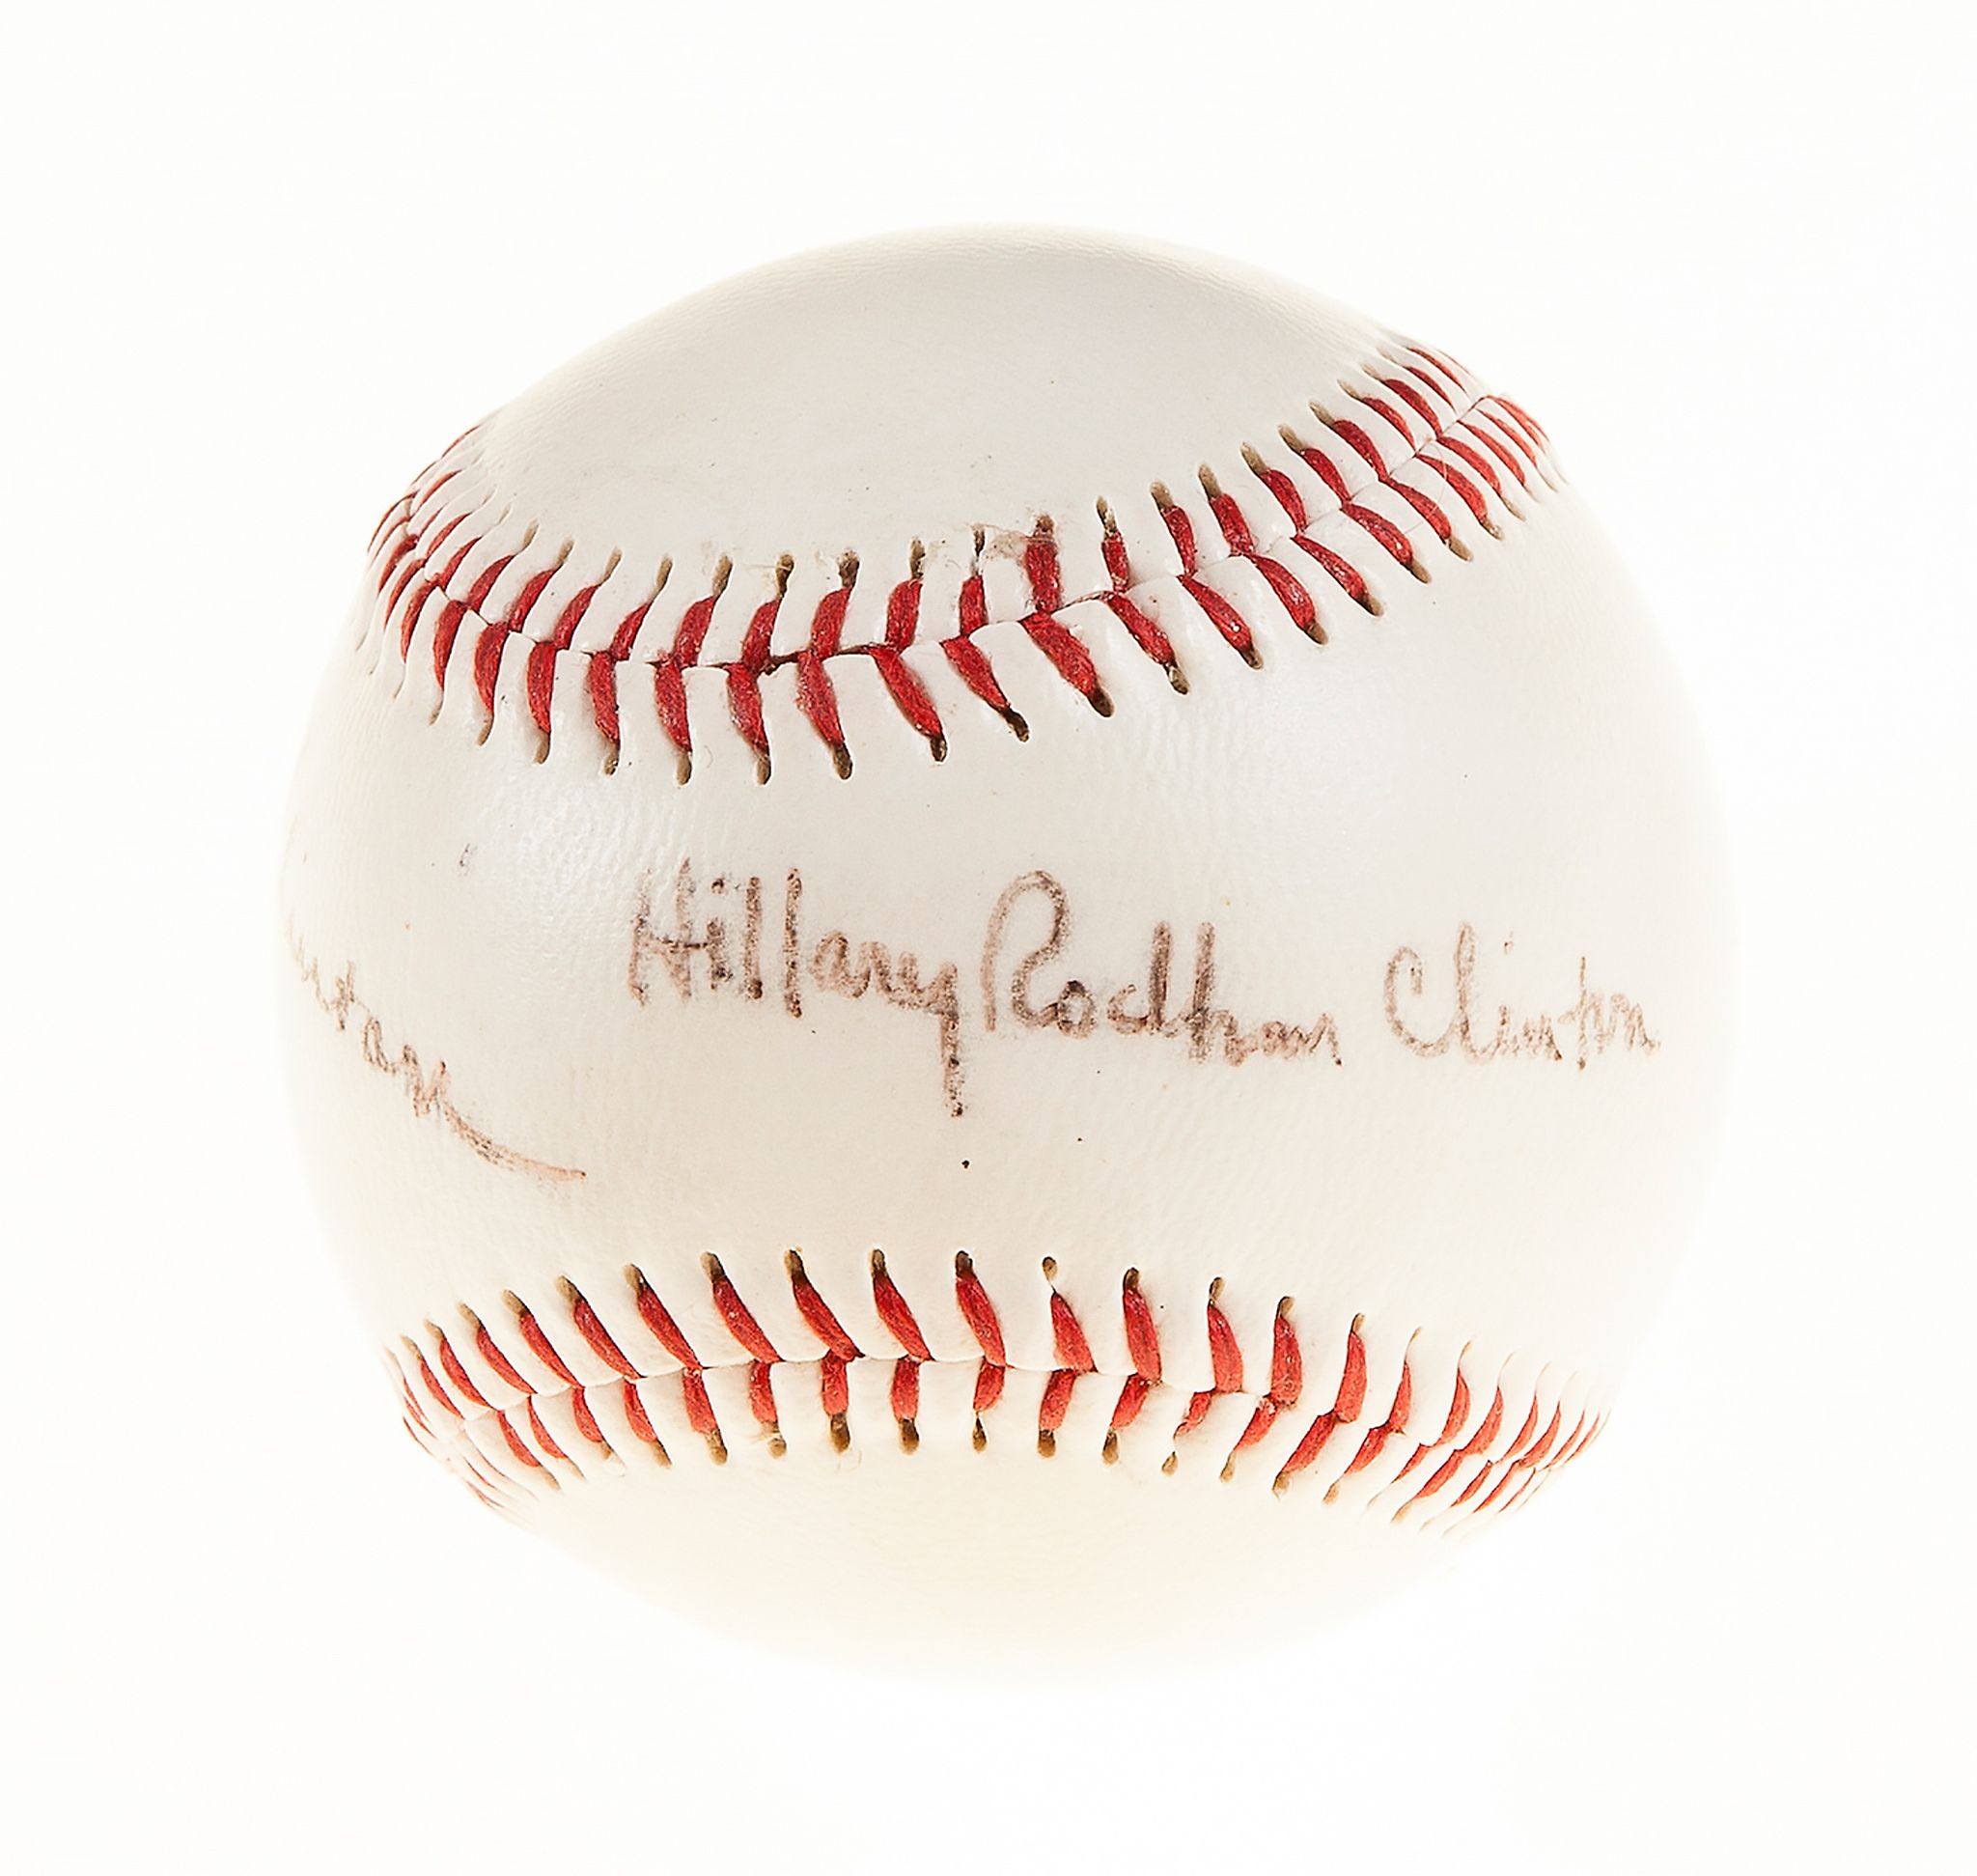 CLINTON, BILL AND HILLARY - Baseball signed by Bill Clinton and Hillary Rodham Clinton Baseball - Image 2 of 2